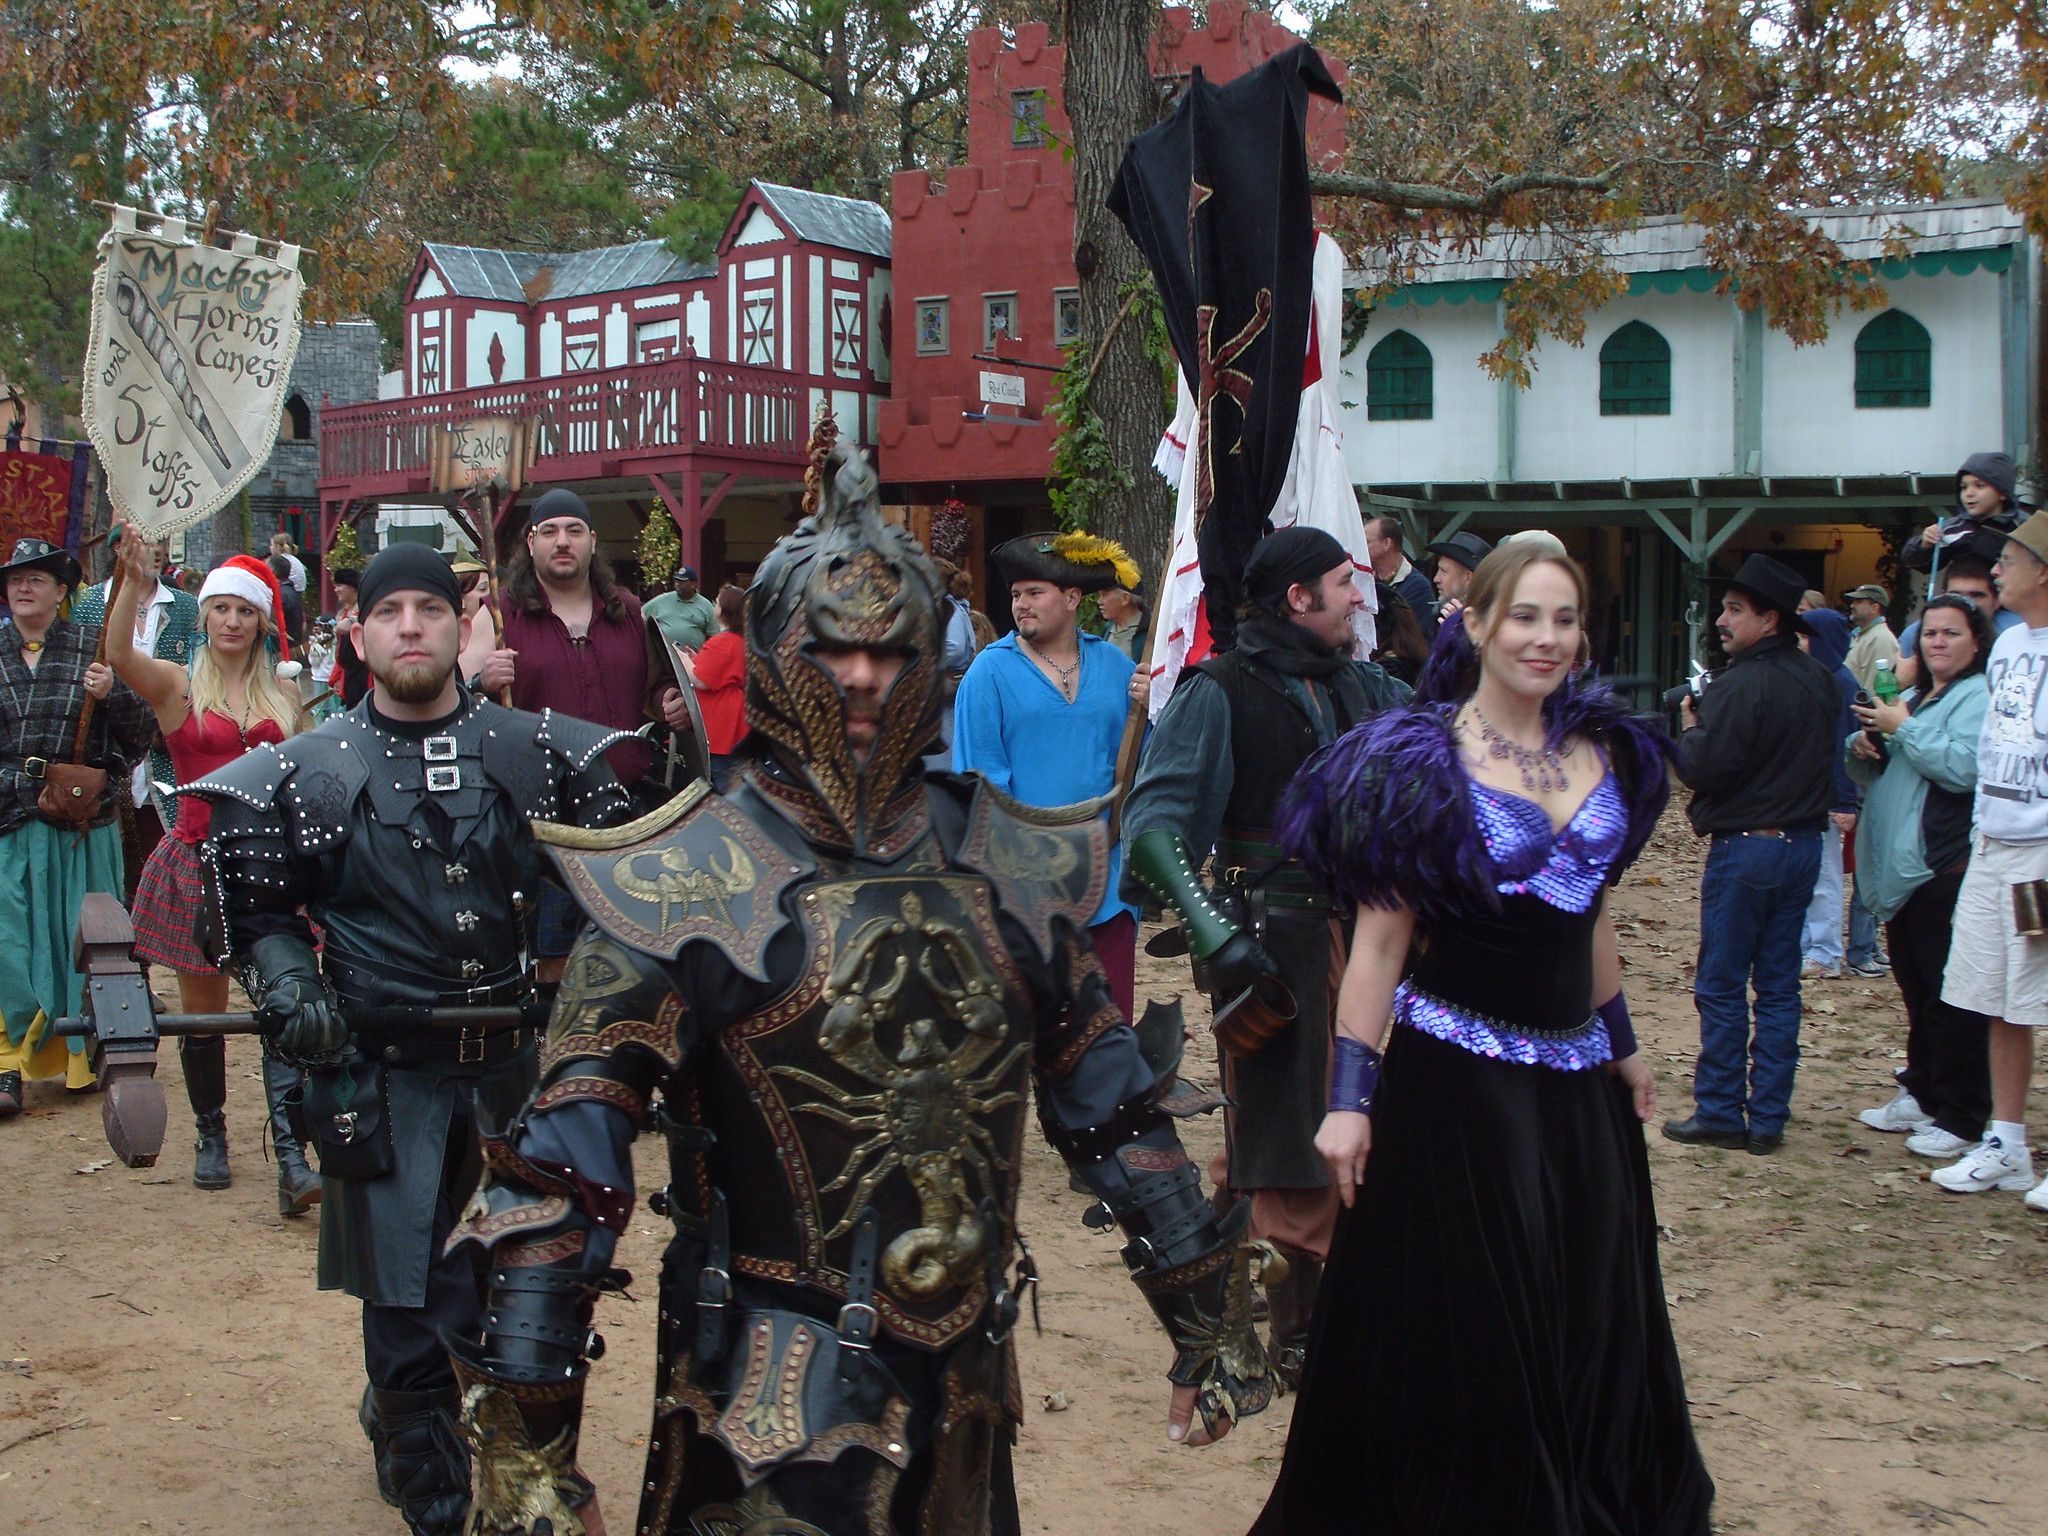 <p><strong>Location:</strong> Todd Mission, Texas <br><strong>Era:</strong> 1500s (Tudor England) <br><strong>What to do:</strong> <a href="https://www.texrenfest.com">The nation's largest Renaissance fair</a> is held on weekends in October and November on 55 acres northwest of Houston. Enjoy 200 daily performances, browse 400 shops, and gorge on massive turkey legs and other "ye olde" classics. <br><strong>Cost:</strong> Prices vary by weekend; $15 and up for adults; $7.50 and up for ages 5 to 12</p>